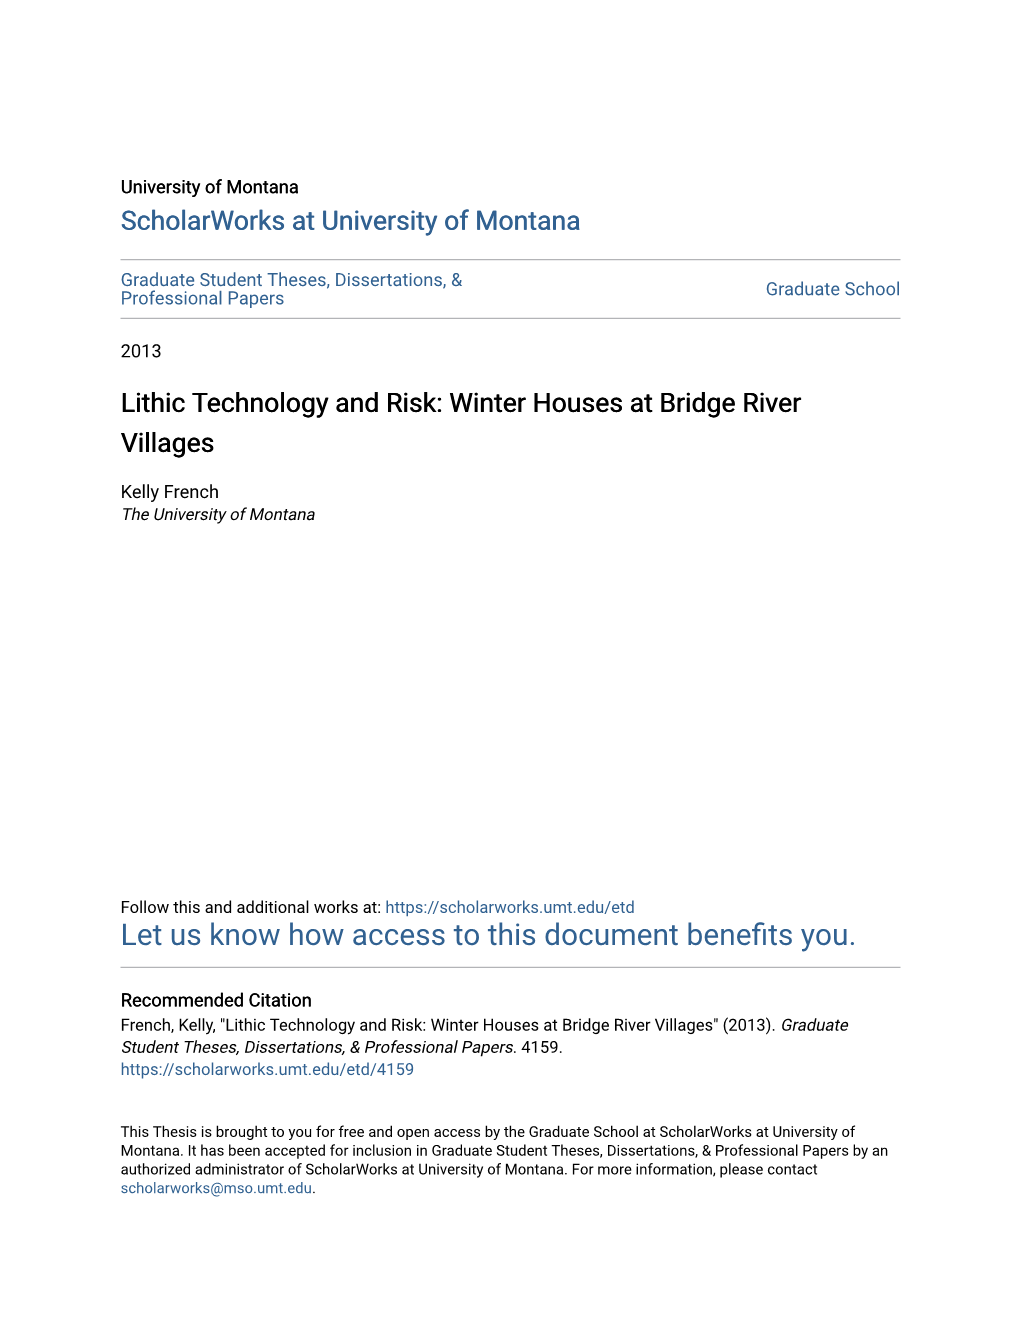 Lithic Technology and Risk: Winter Houses at Bridge River Villages